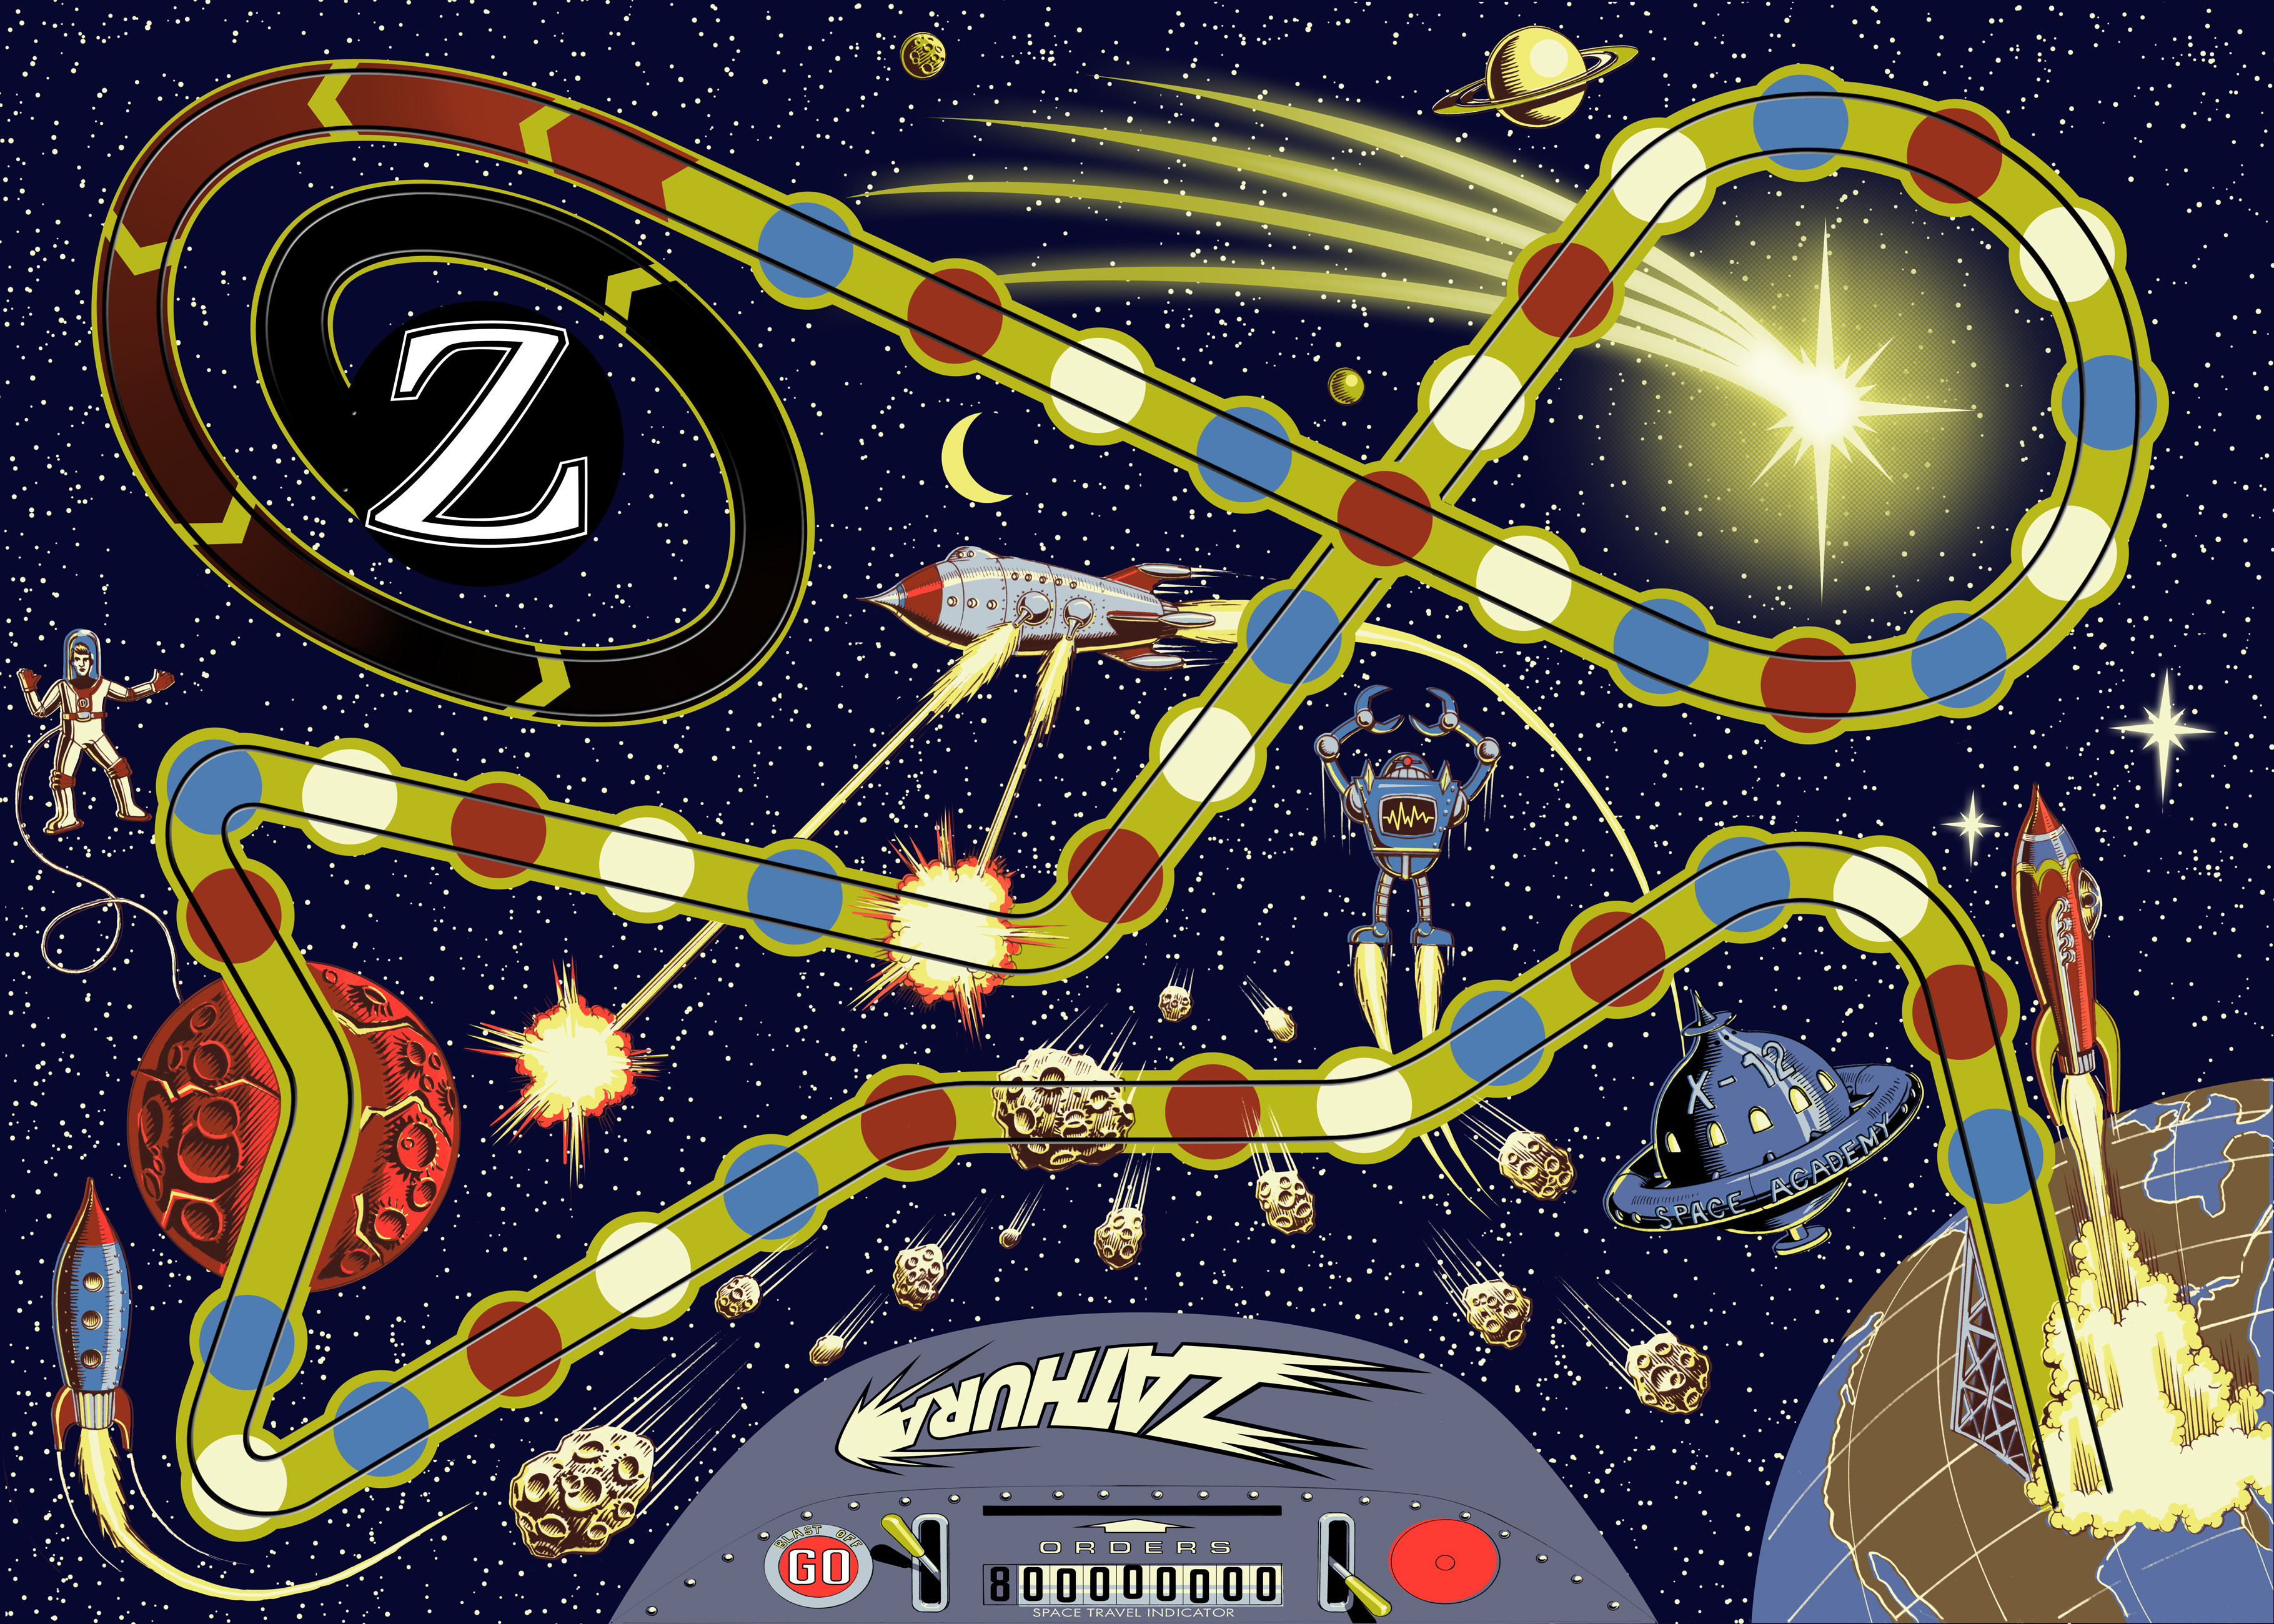 Final gameboard graphics. Pen on illustration board, colorized in Photoshop. Note the off-register colors :)